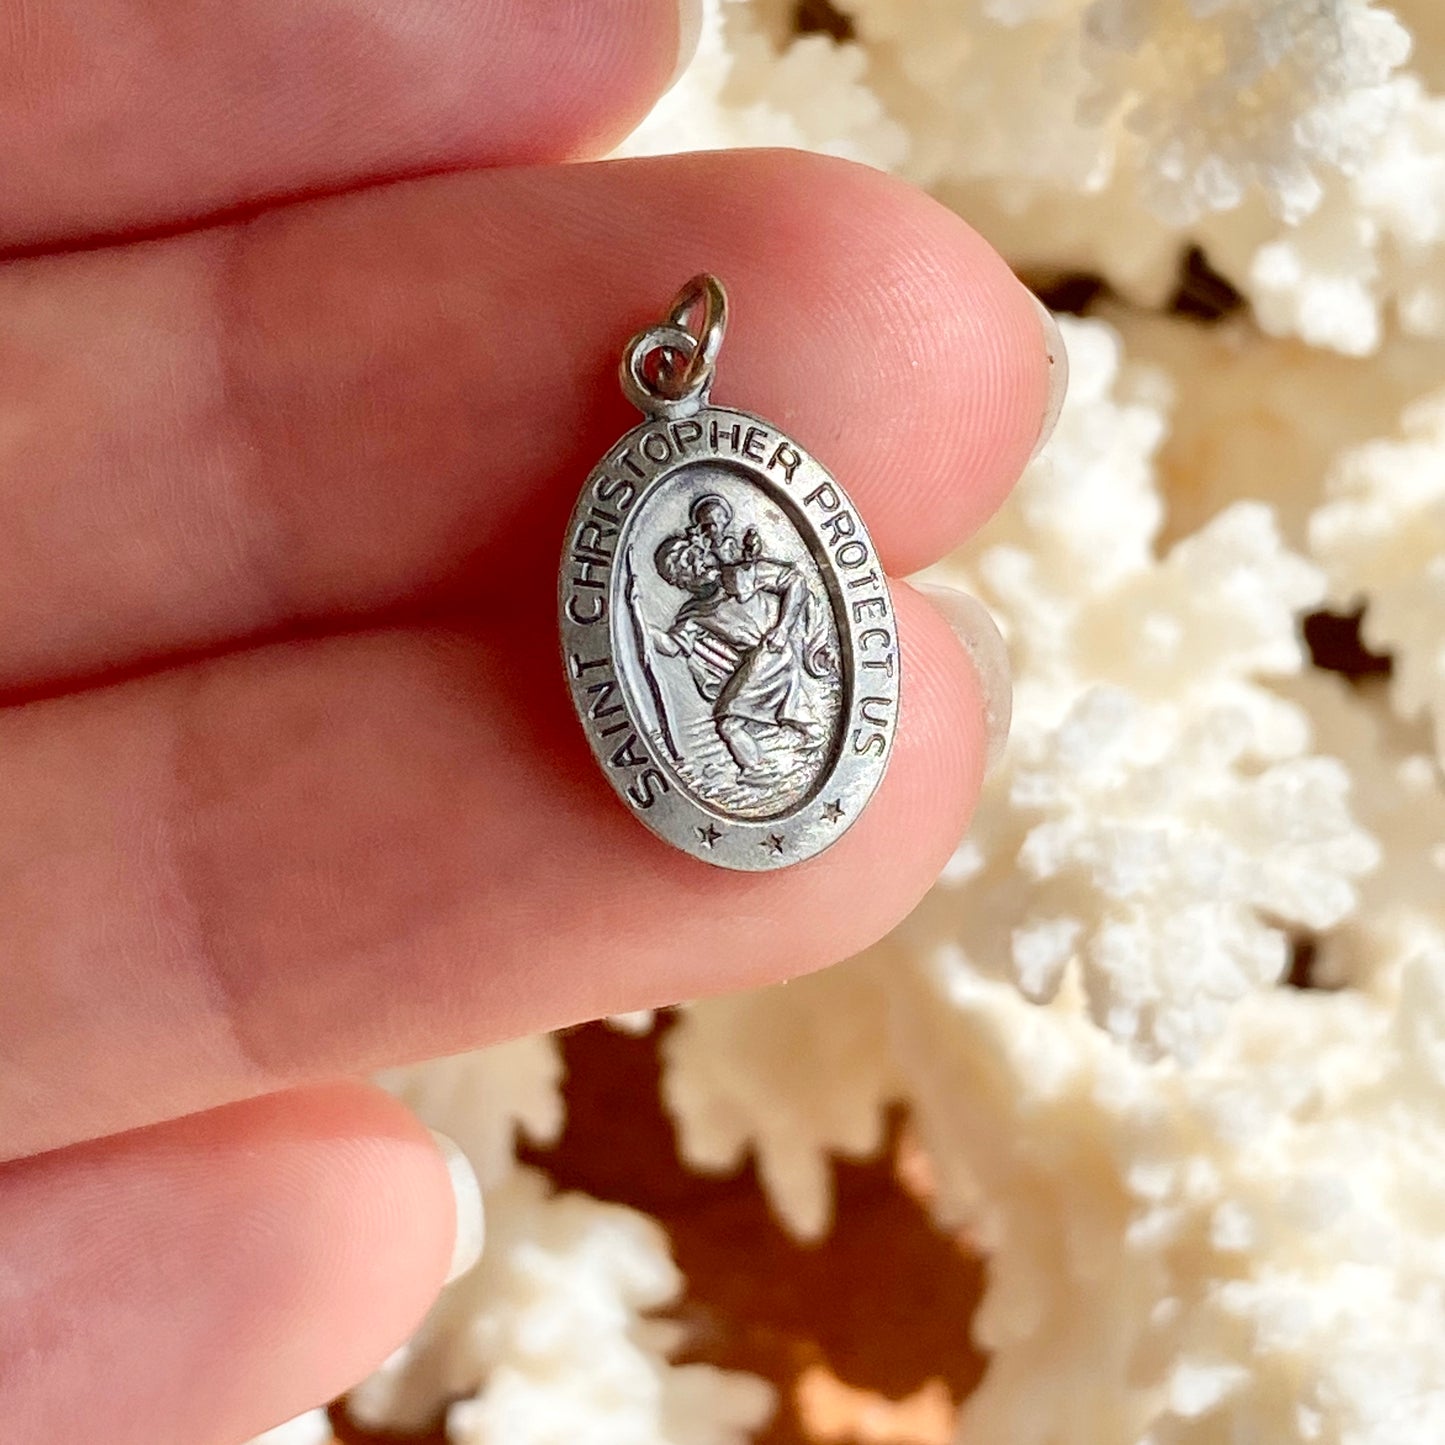 Sterling Silver Antiqued Saint Christopher Oval Medal Pendant Charm 21mm, Sterling Silver Antiqued Saint Christopher Oval Medal Pendant Charm 21mm - Legacy Saint Jewelry